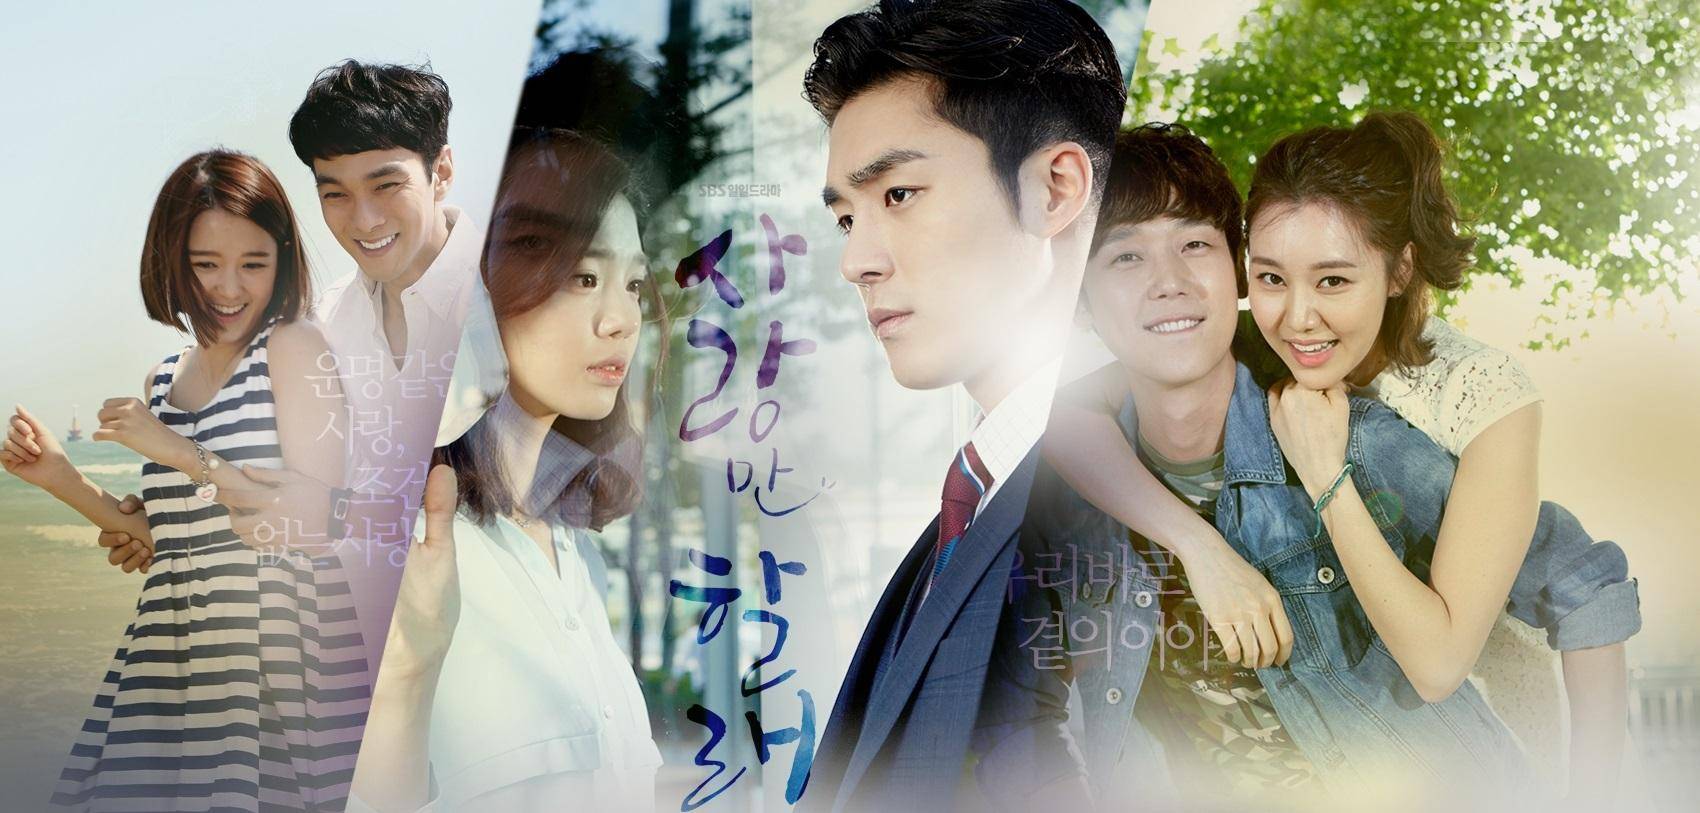 [Video] Updated cast, added teaser trailers and images for the Korean